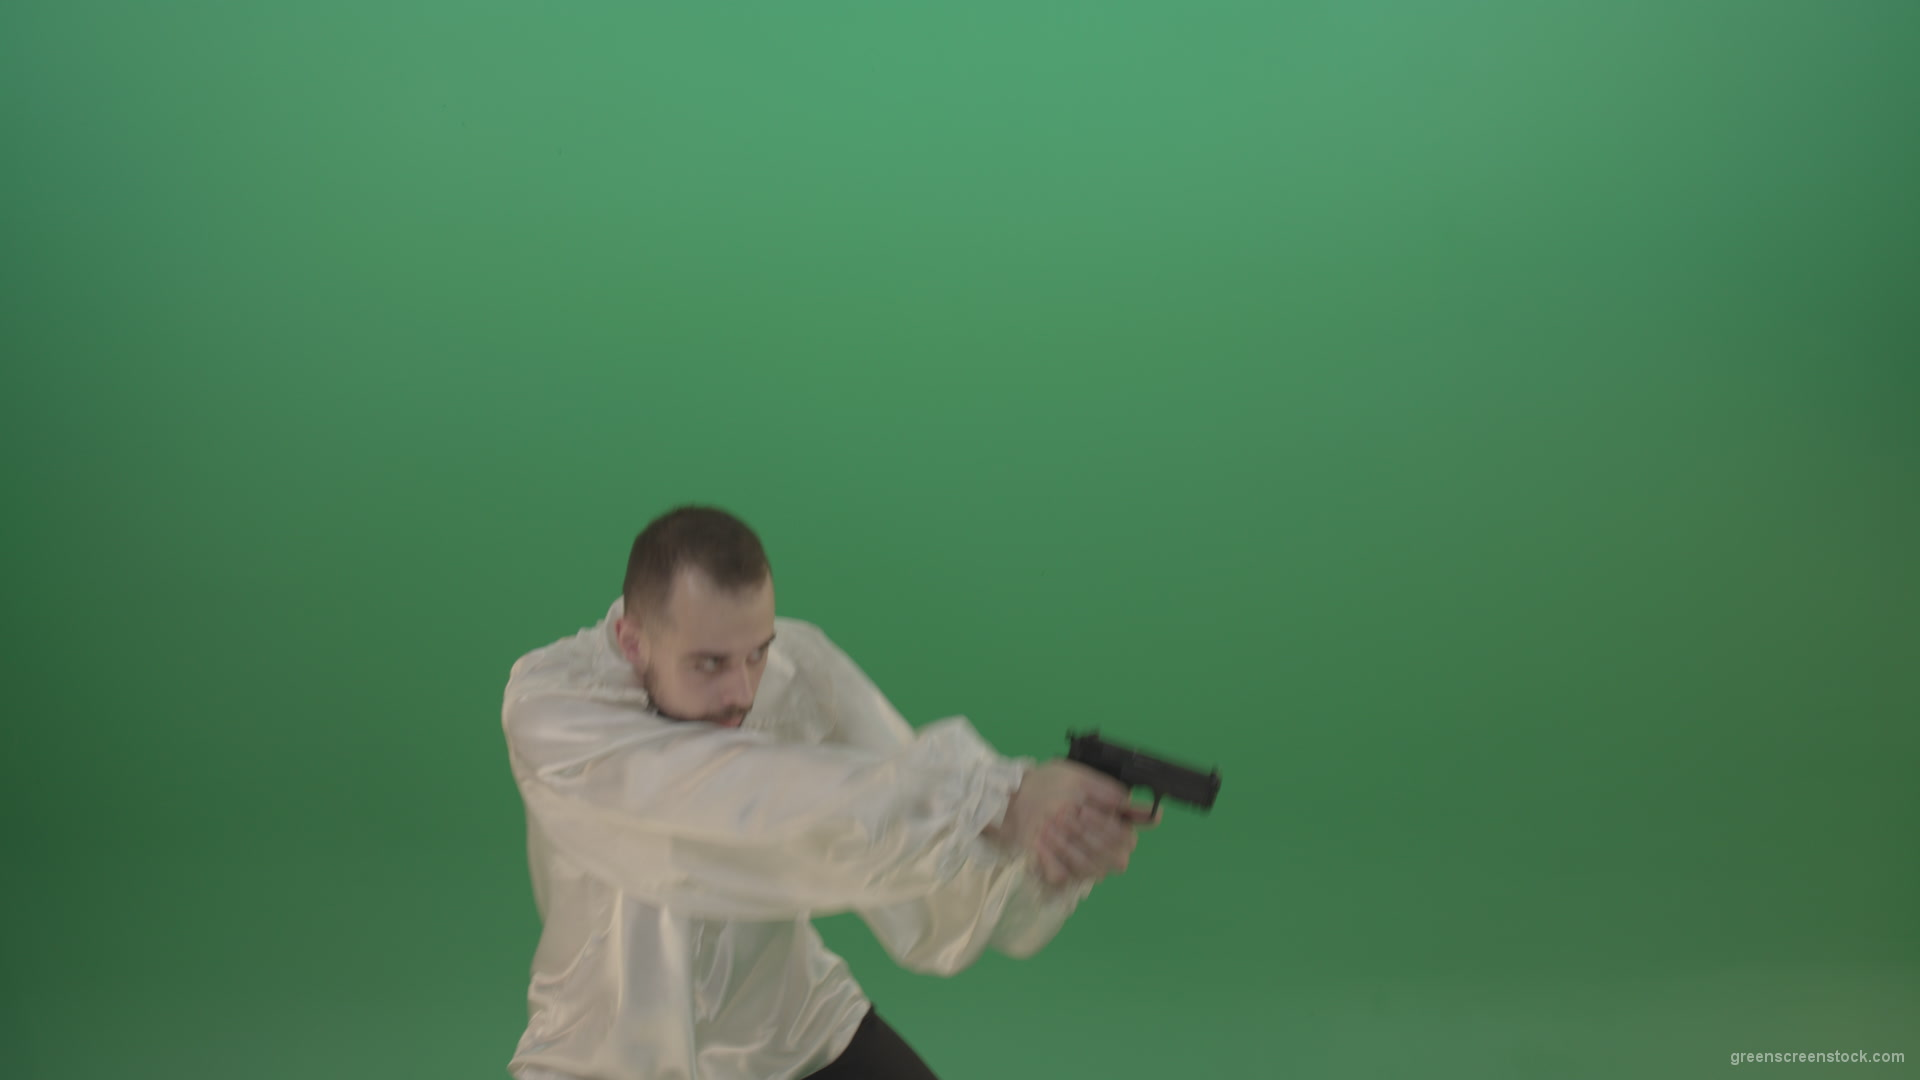 Man-in-white-shirt-shooting-with-pistol-hand-gun-isolated-in-green-screen-studio_006 Green Screen Stock